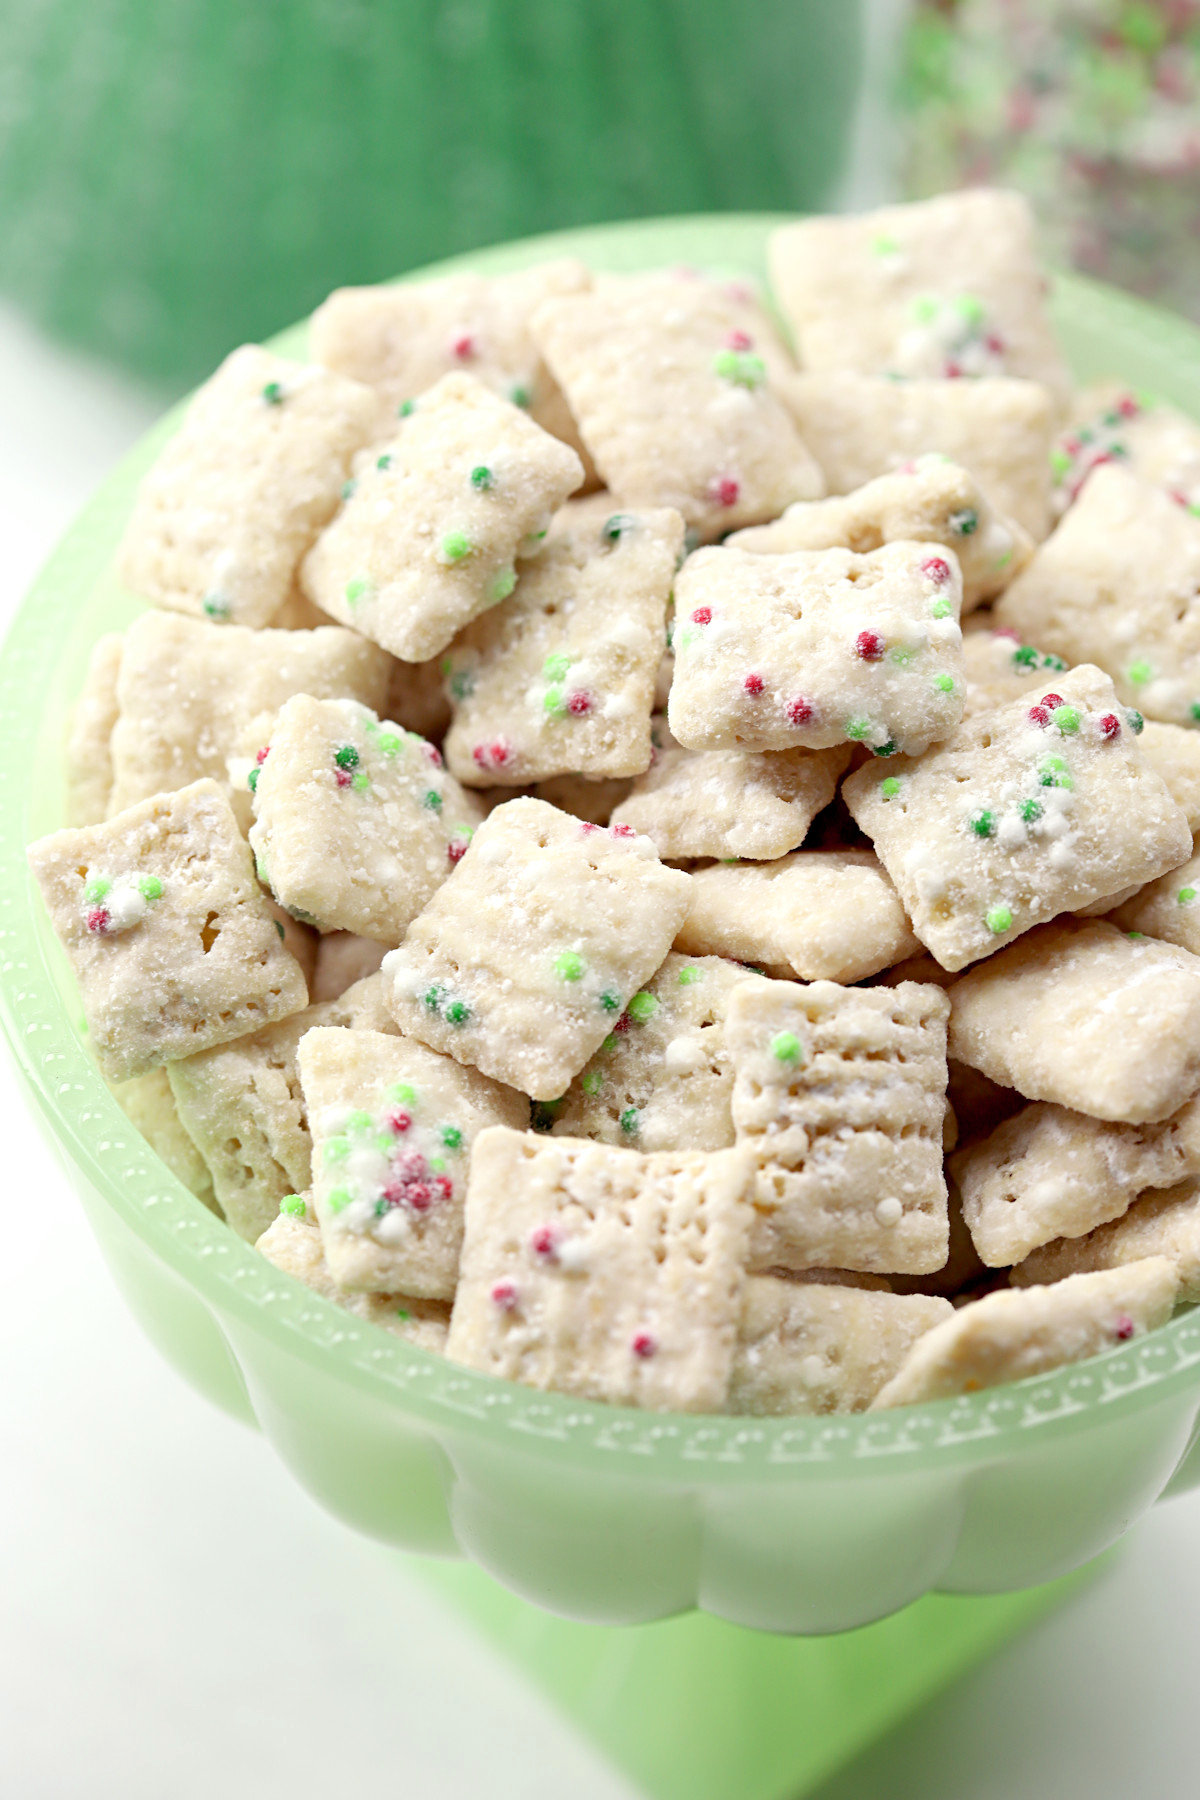 A green bowl filled with Christmas muddy buddies.